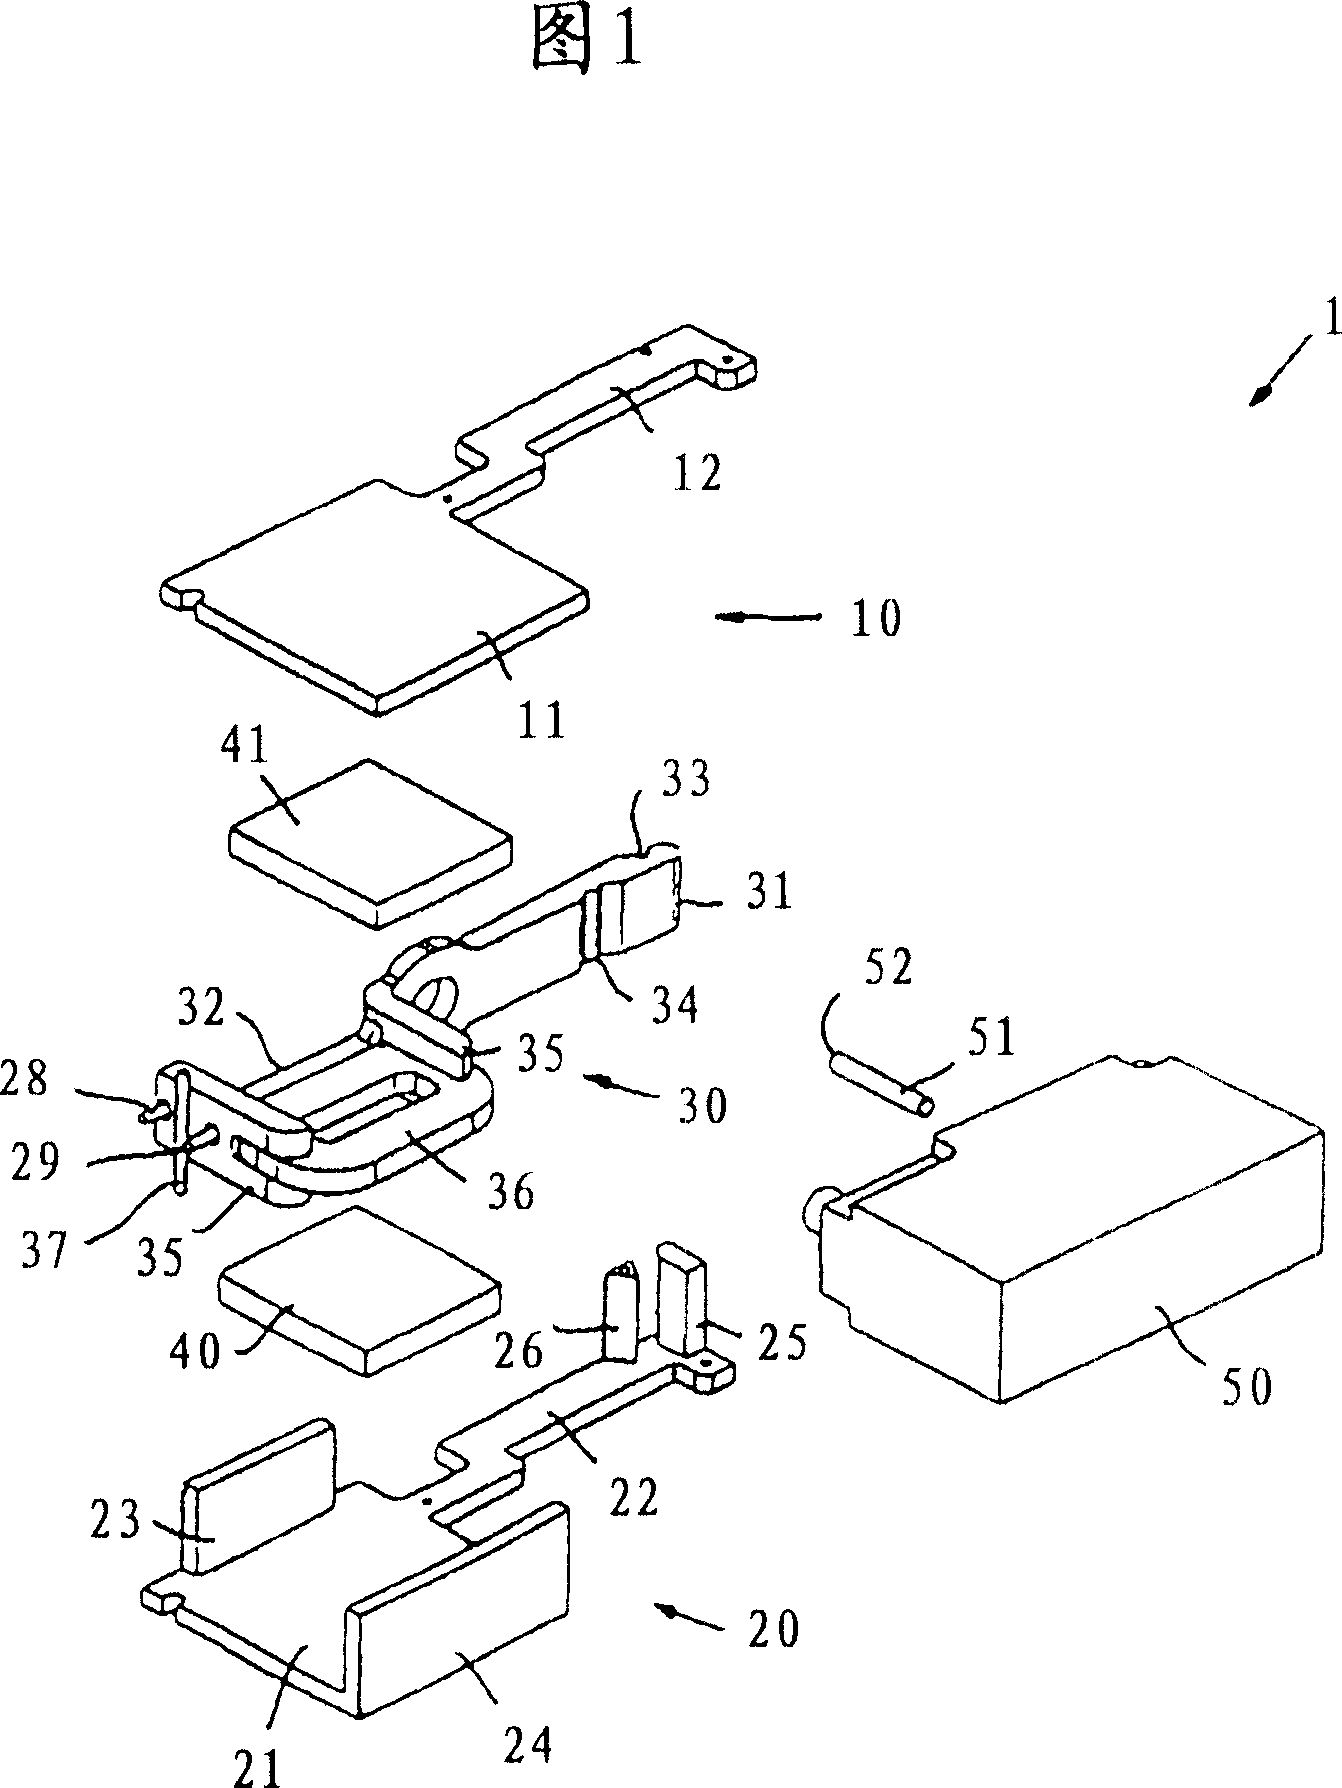 Actuator system comprising detector means